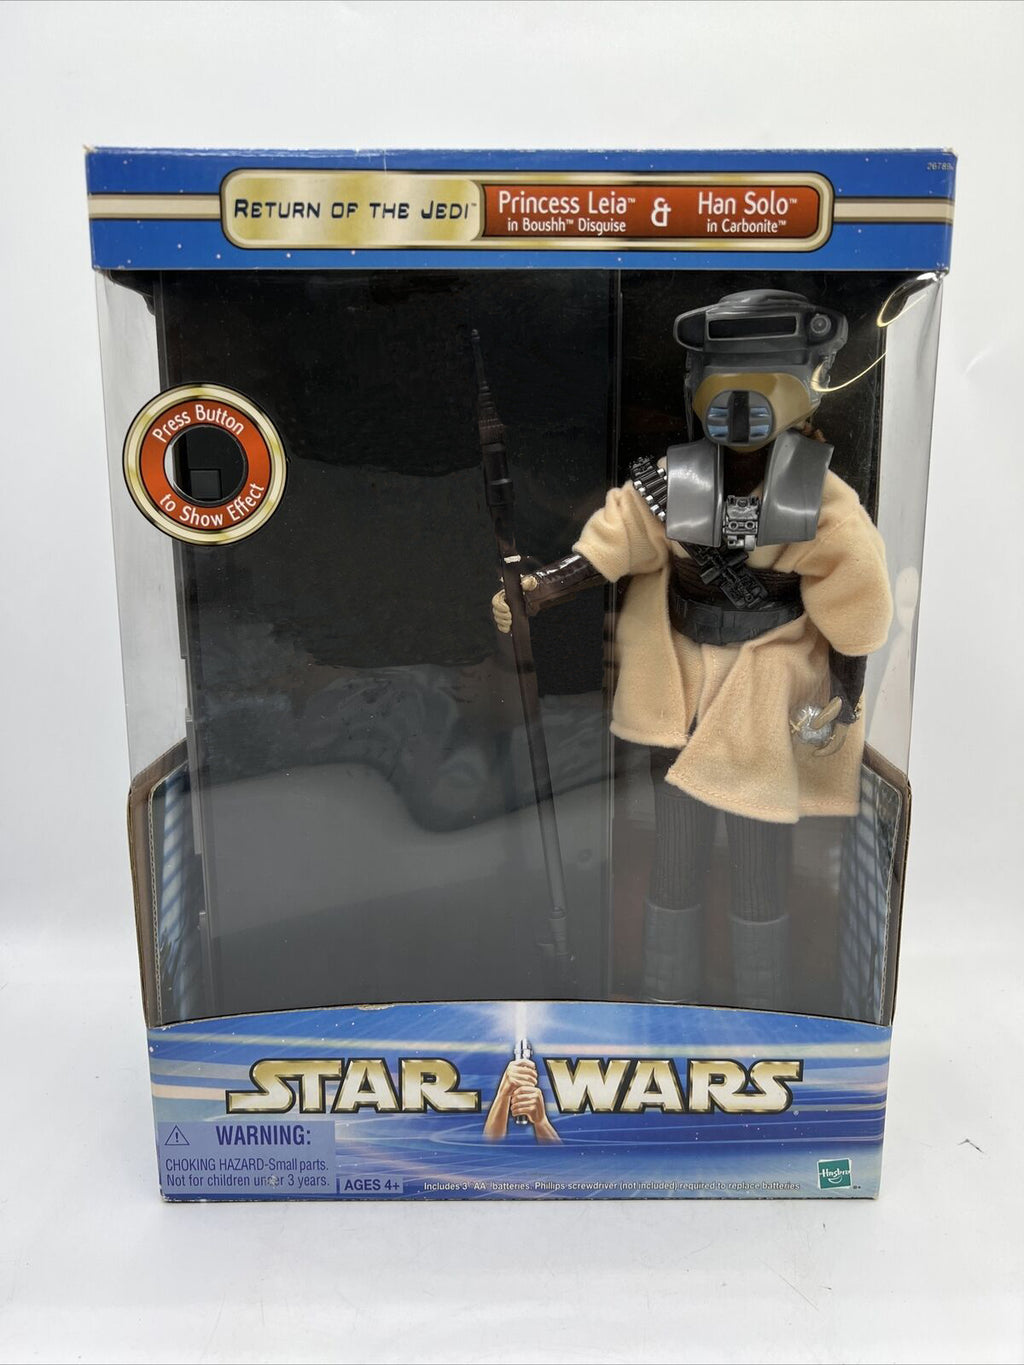 Star Wars Princess Leia Boushh Disguise Jabba's Palace Han Solo in Carbonite 12 Inch Figure 2002 Return of the Jedi Hasbro